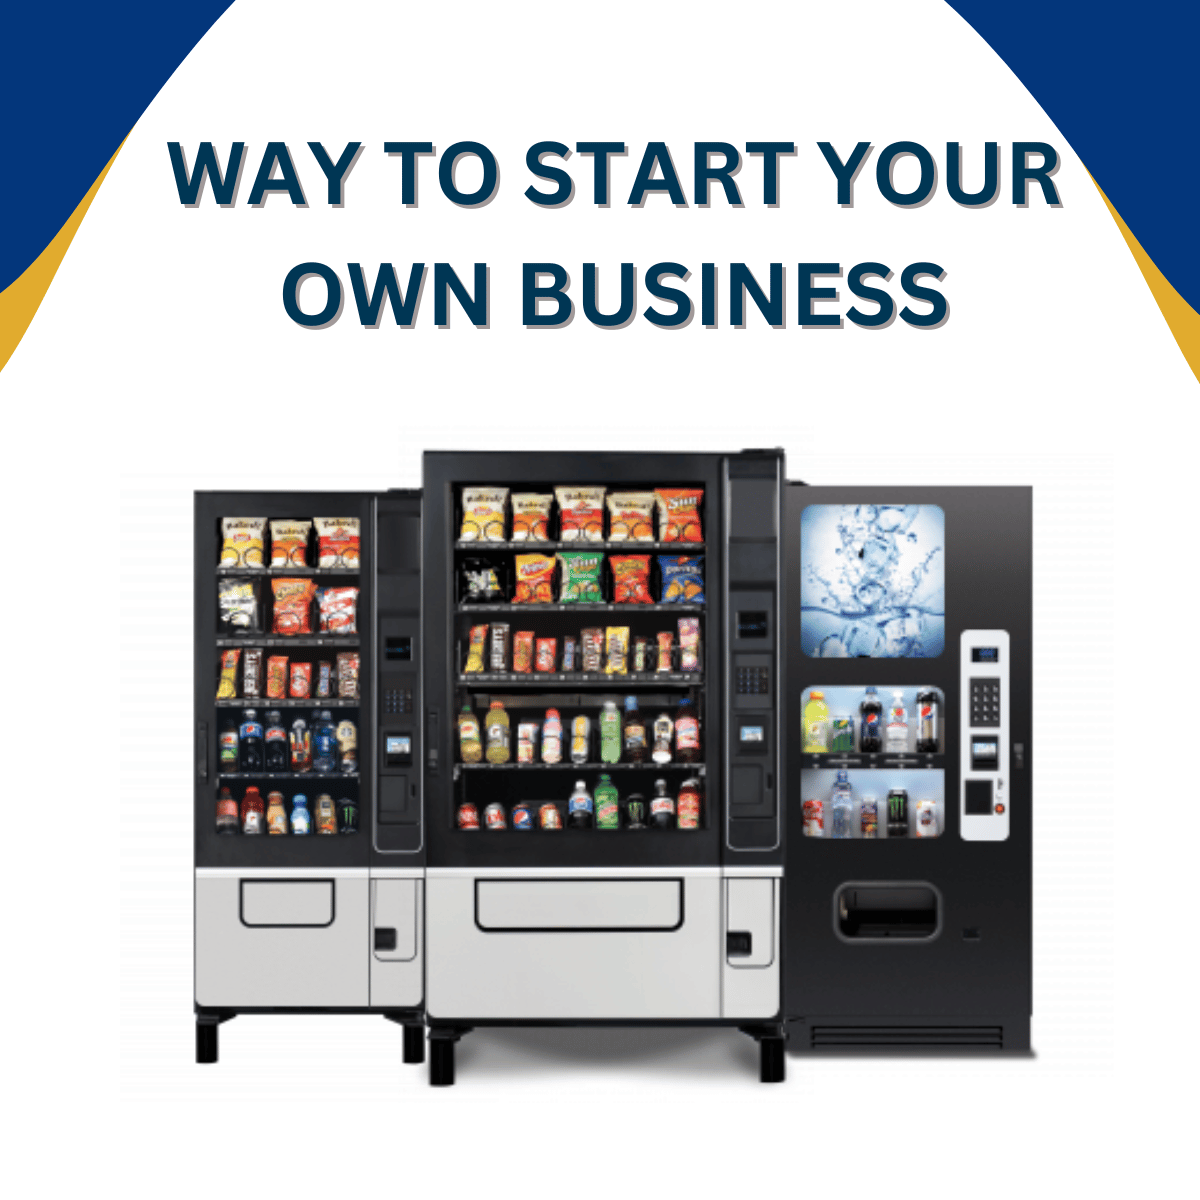 USED VENDING MACHINES OFFER A MONEY SAVING WAY TO START YOUR OWN BUSINESS